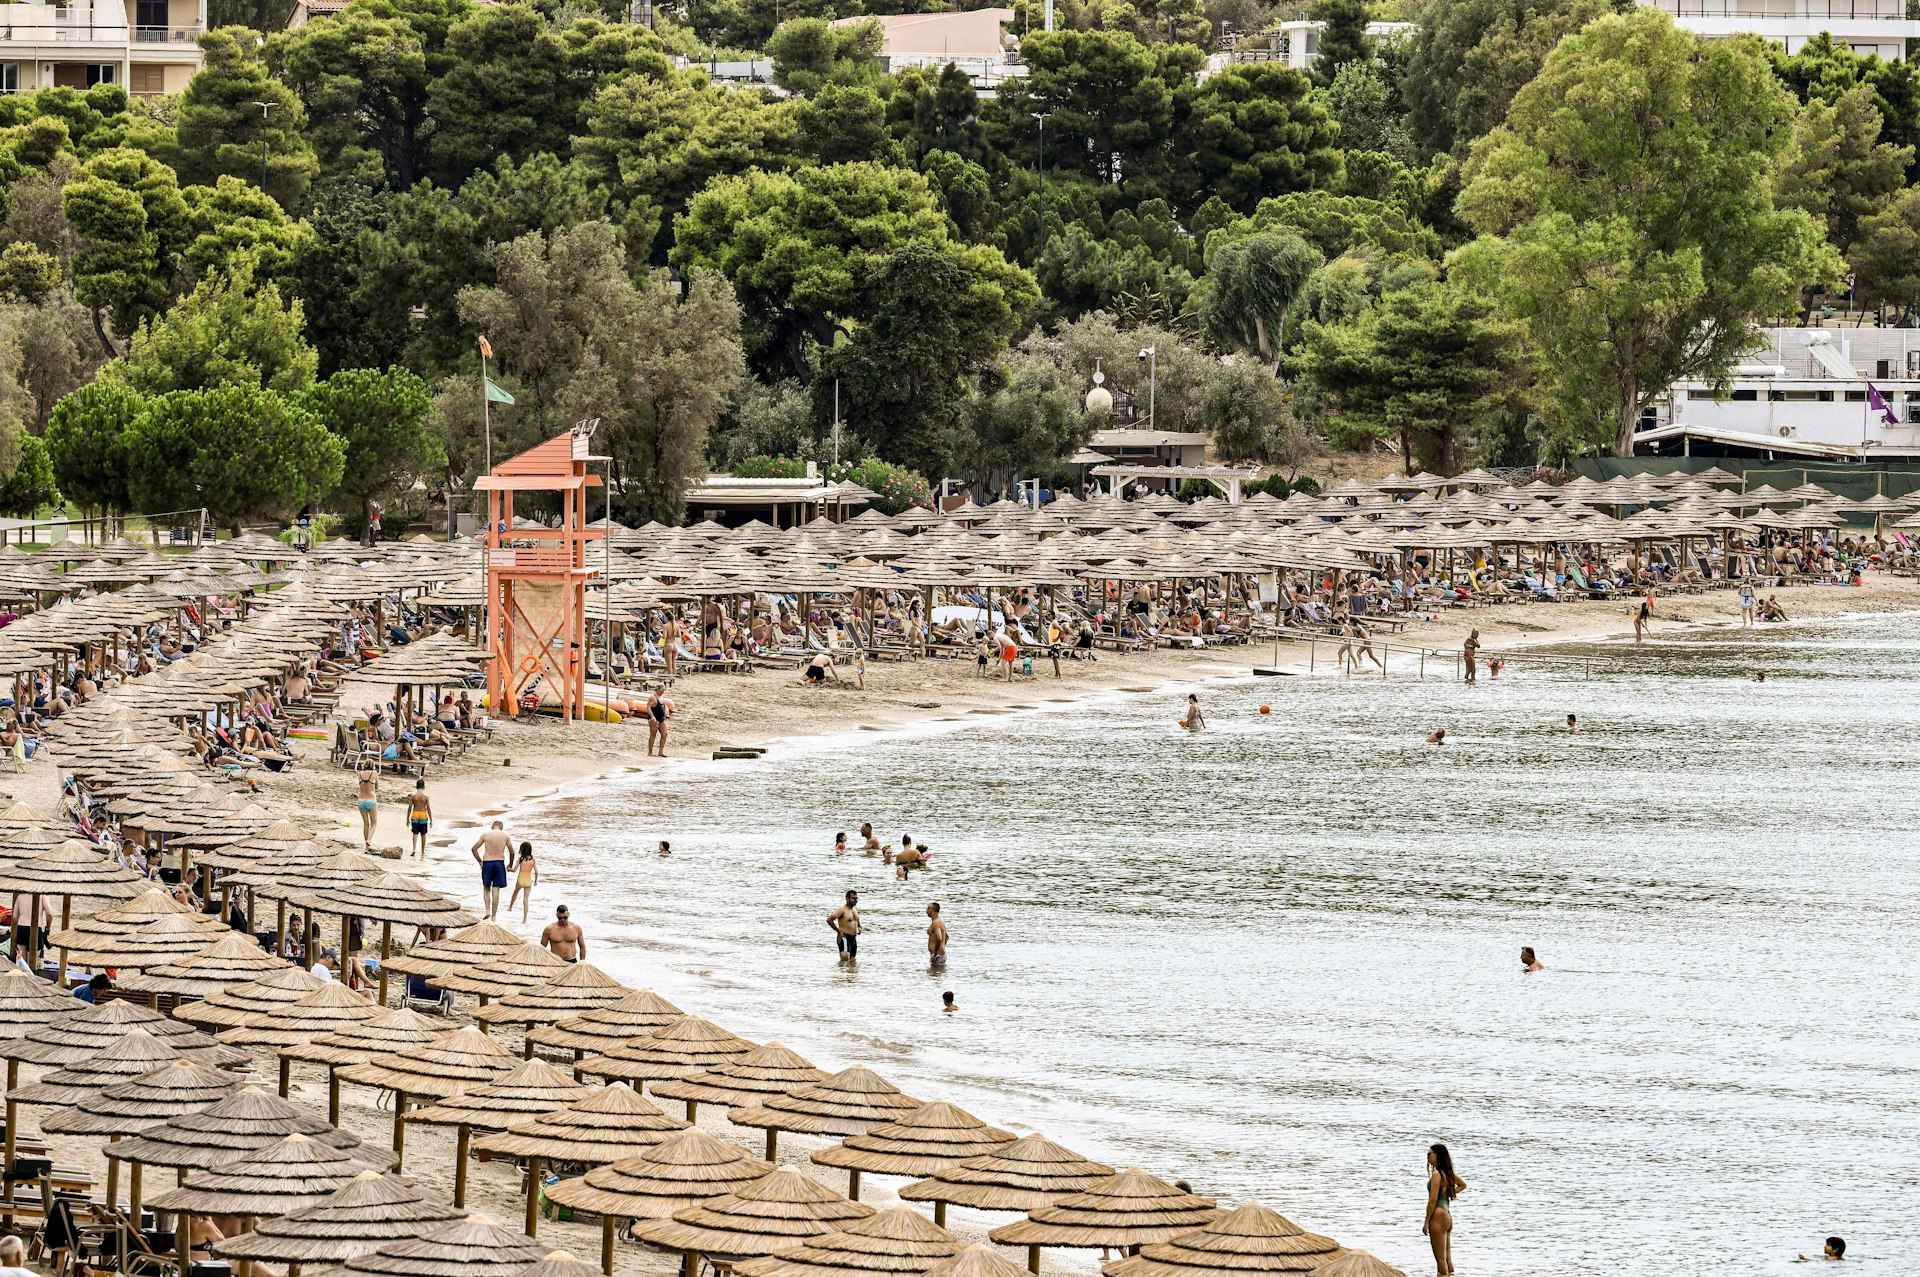 Beach-goers walk, lay and bathe on the Oceanis beach, as the area is covered by umbrellas and sun loungers